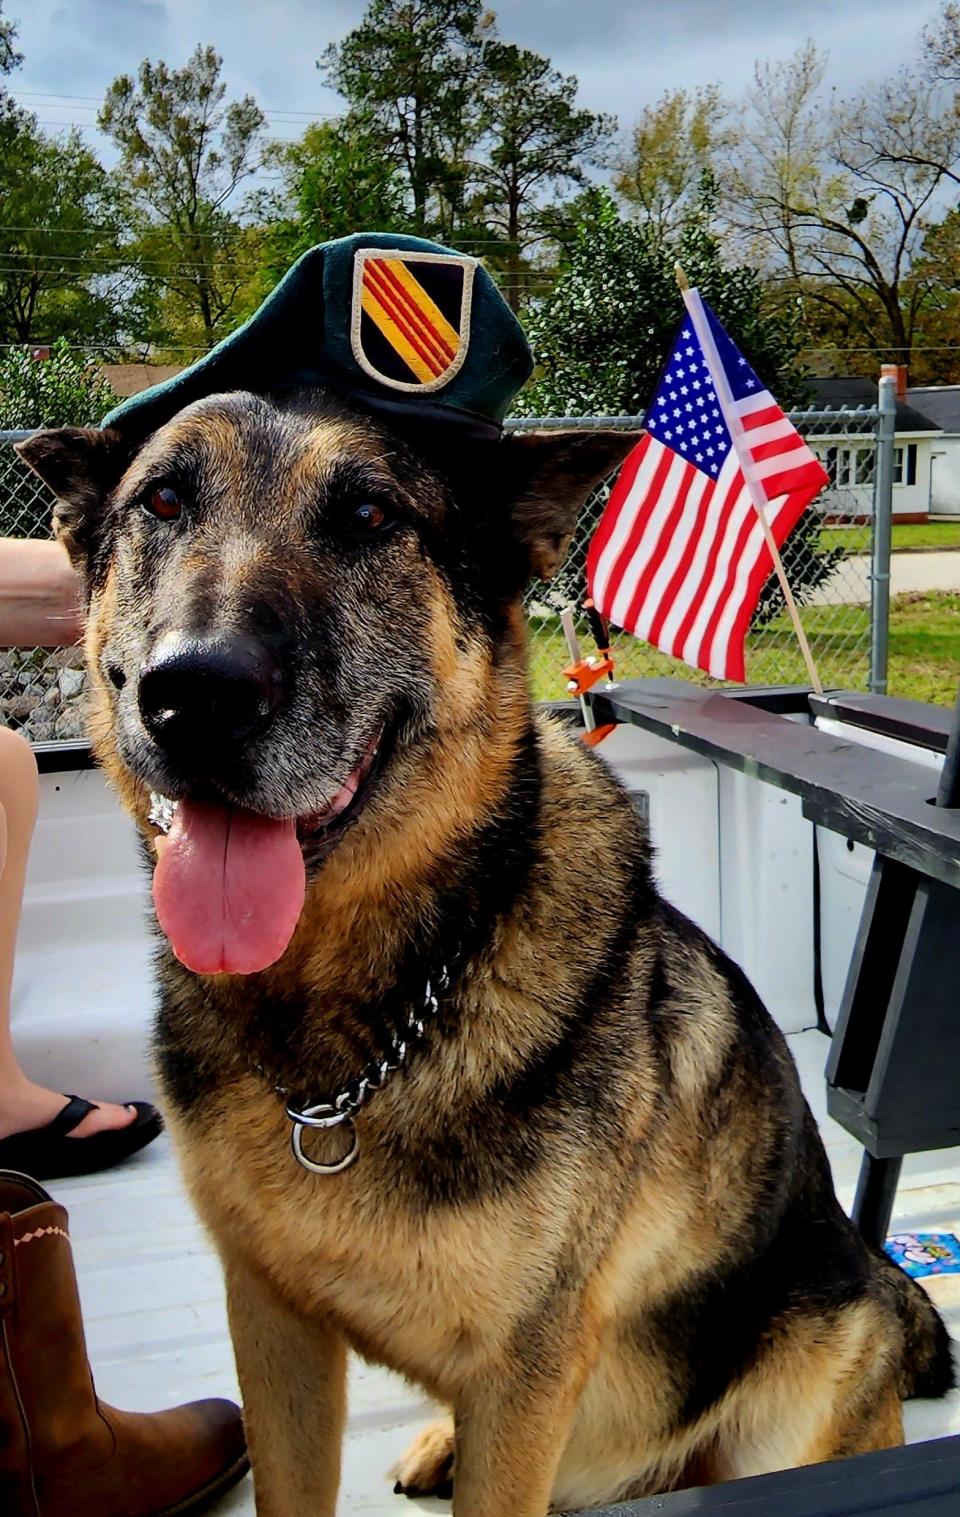 After retirement, Figo served as the mascot of the Whiteville High School JROTC program.